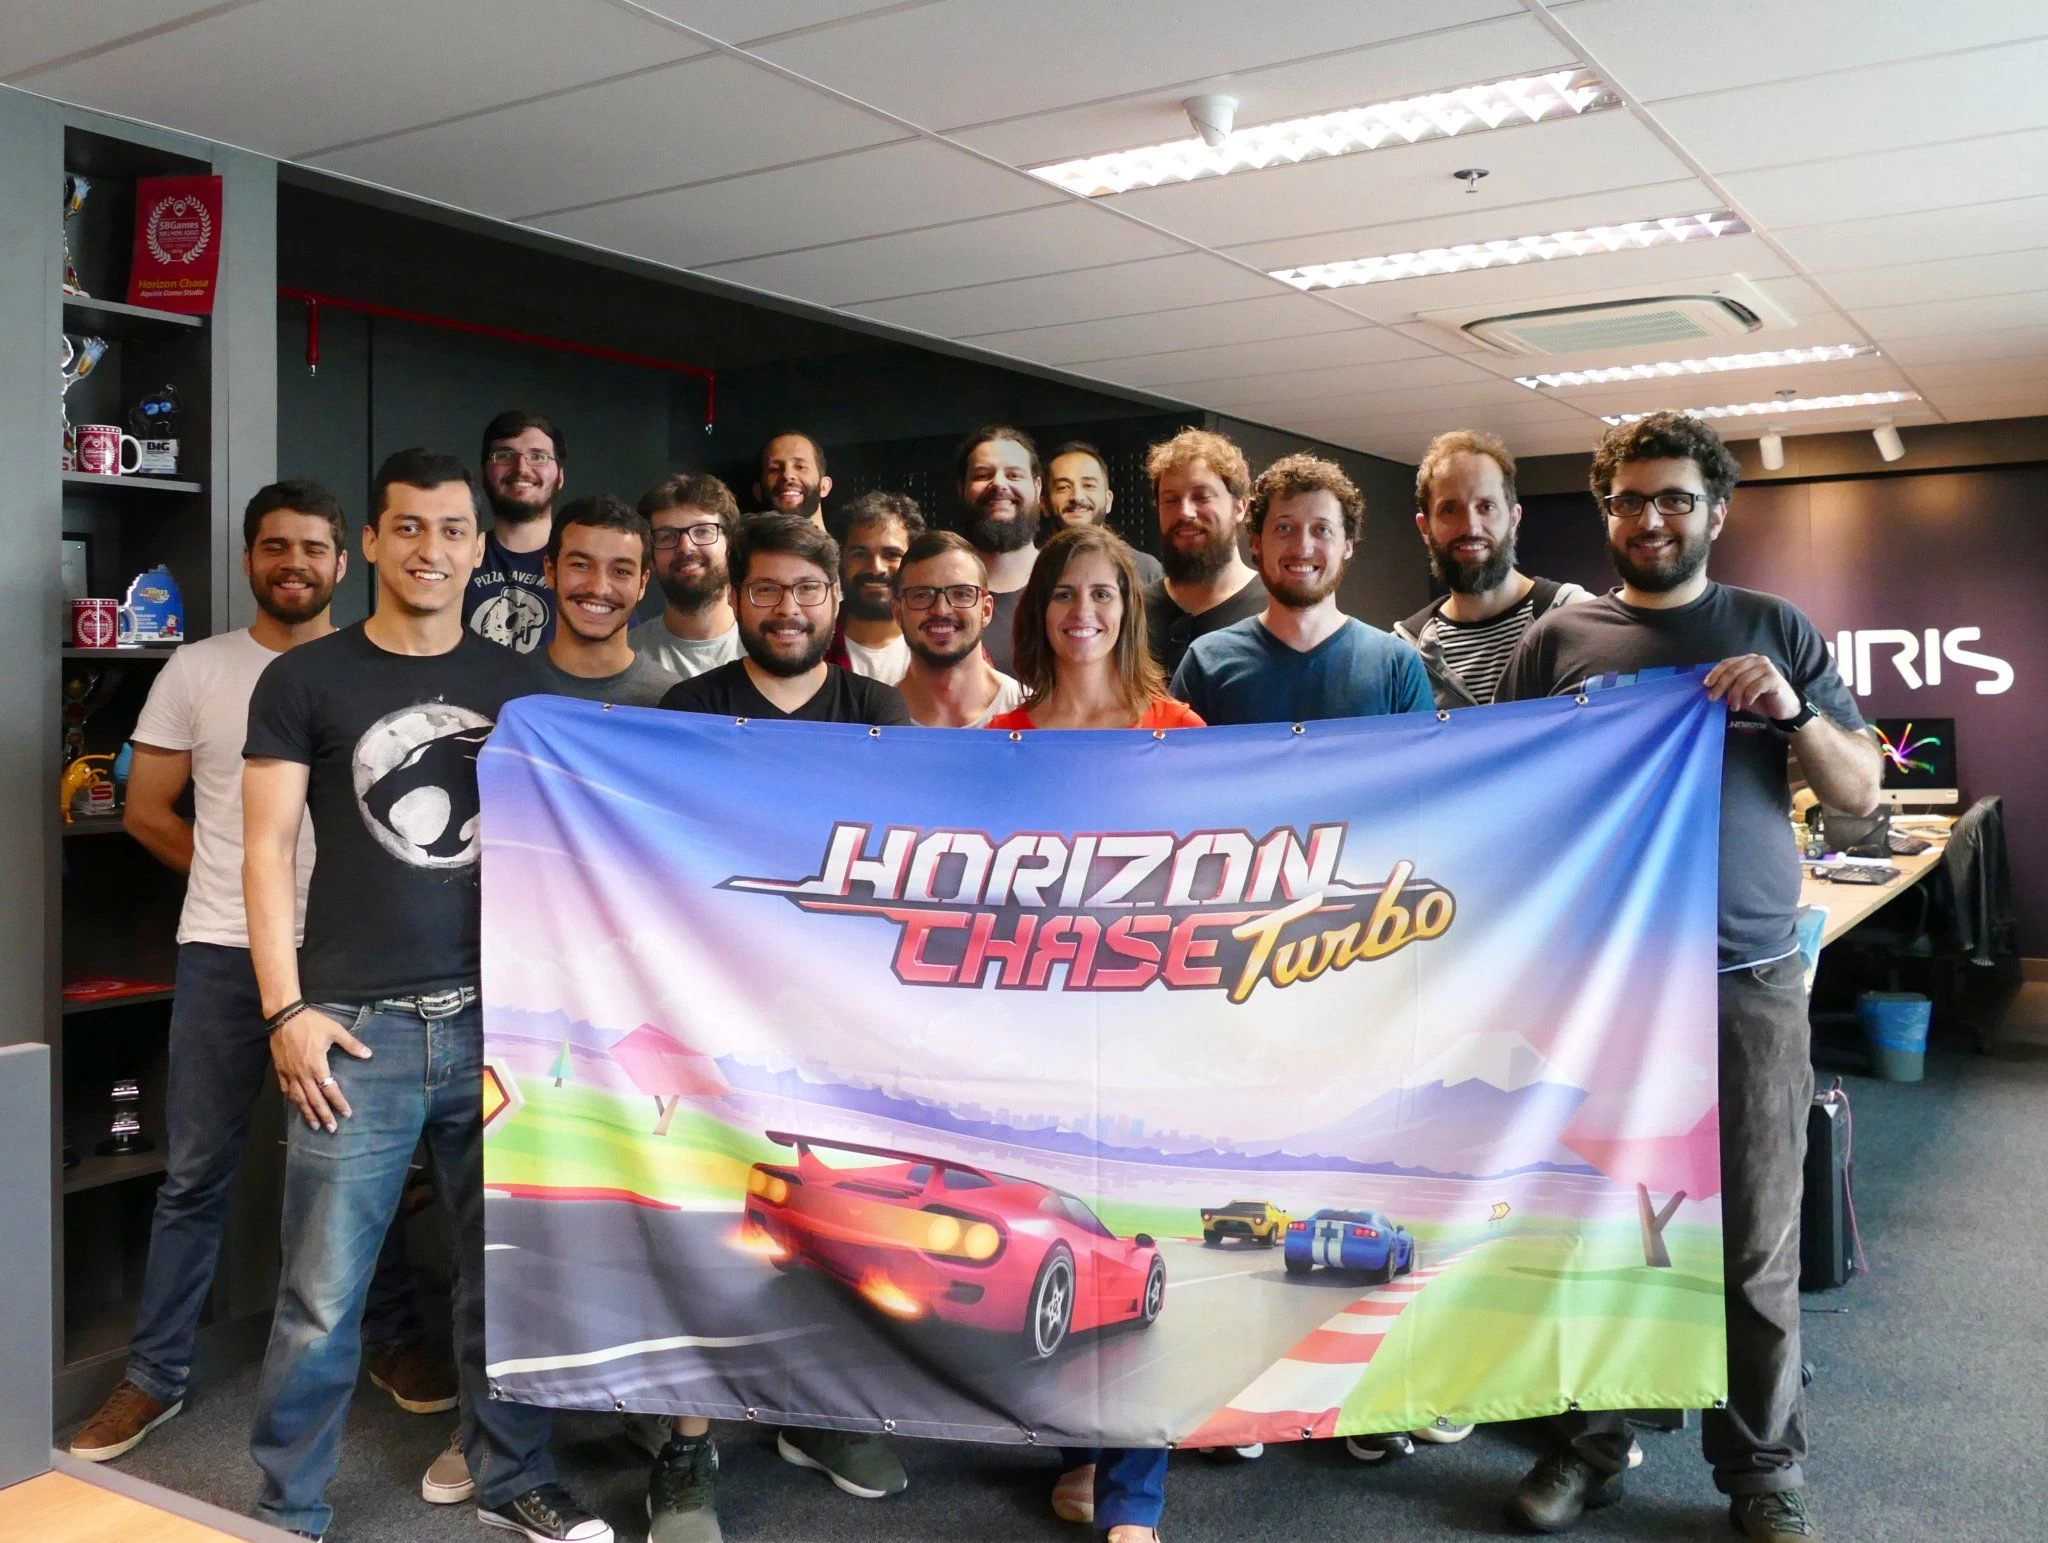 Team photo of the developers of the game Horizon Chase Turbo